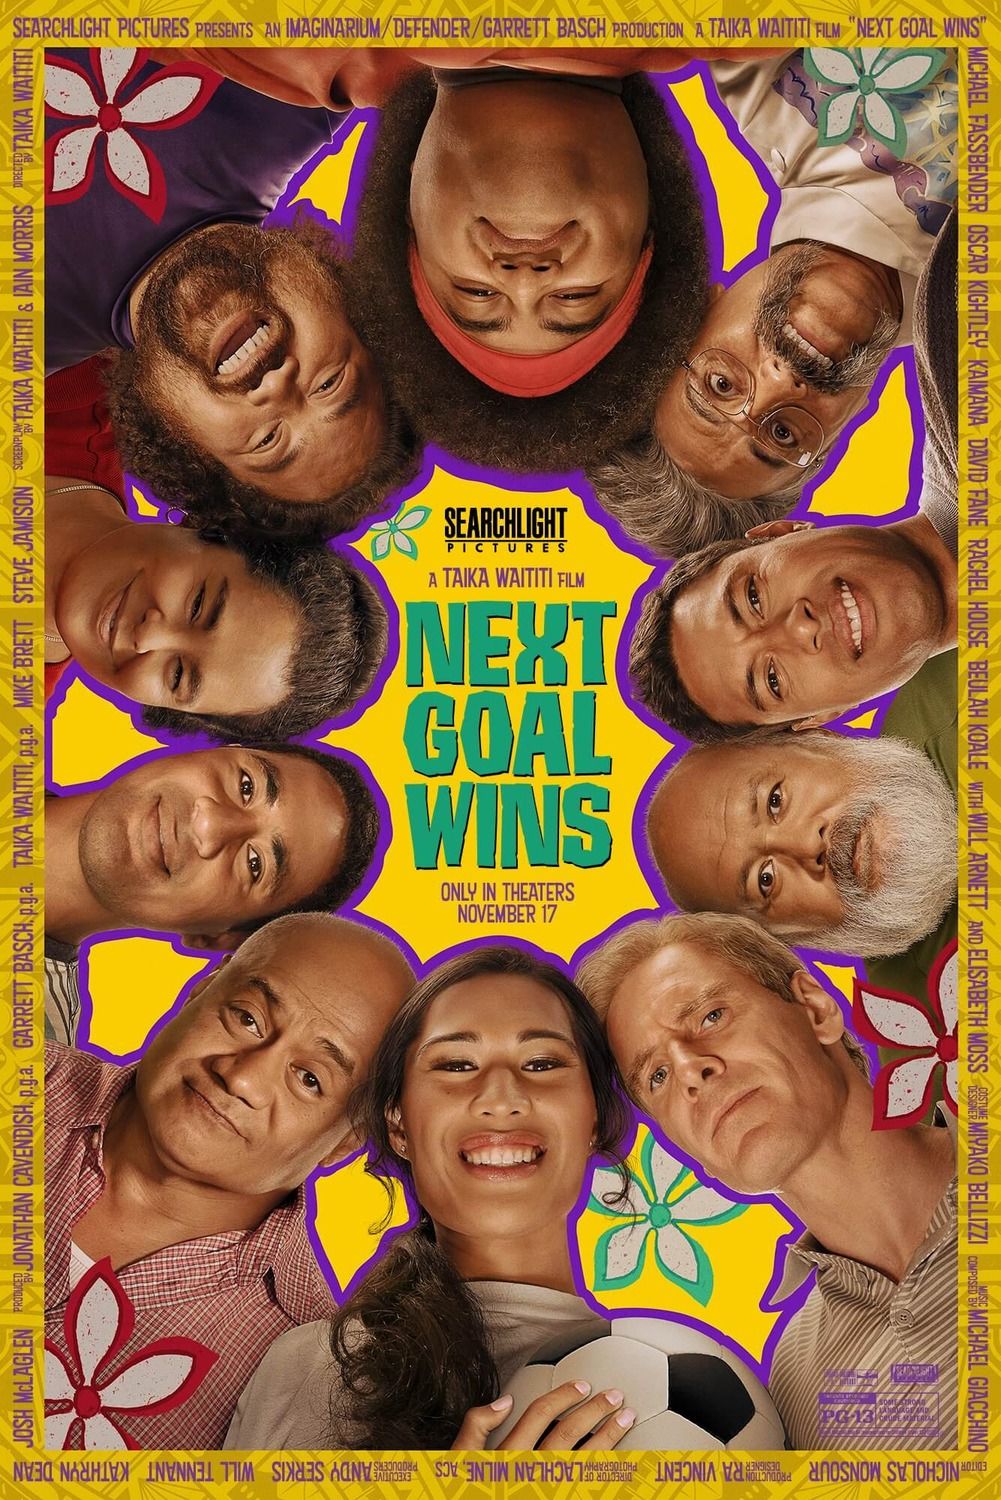 Next Goal Wins Review | A Funny & Heartwarming True Story of Acceptance